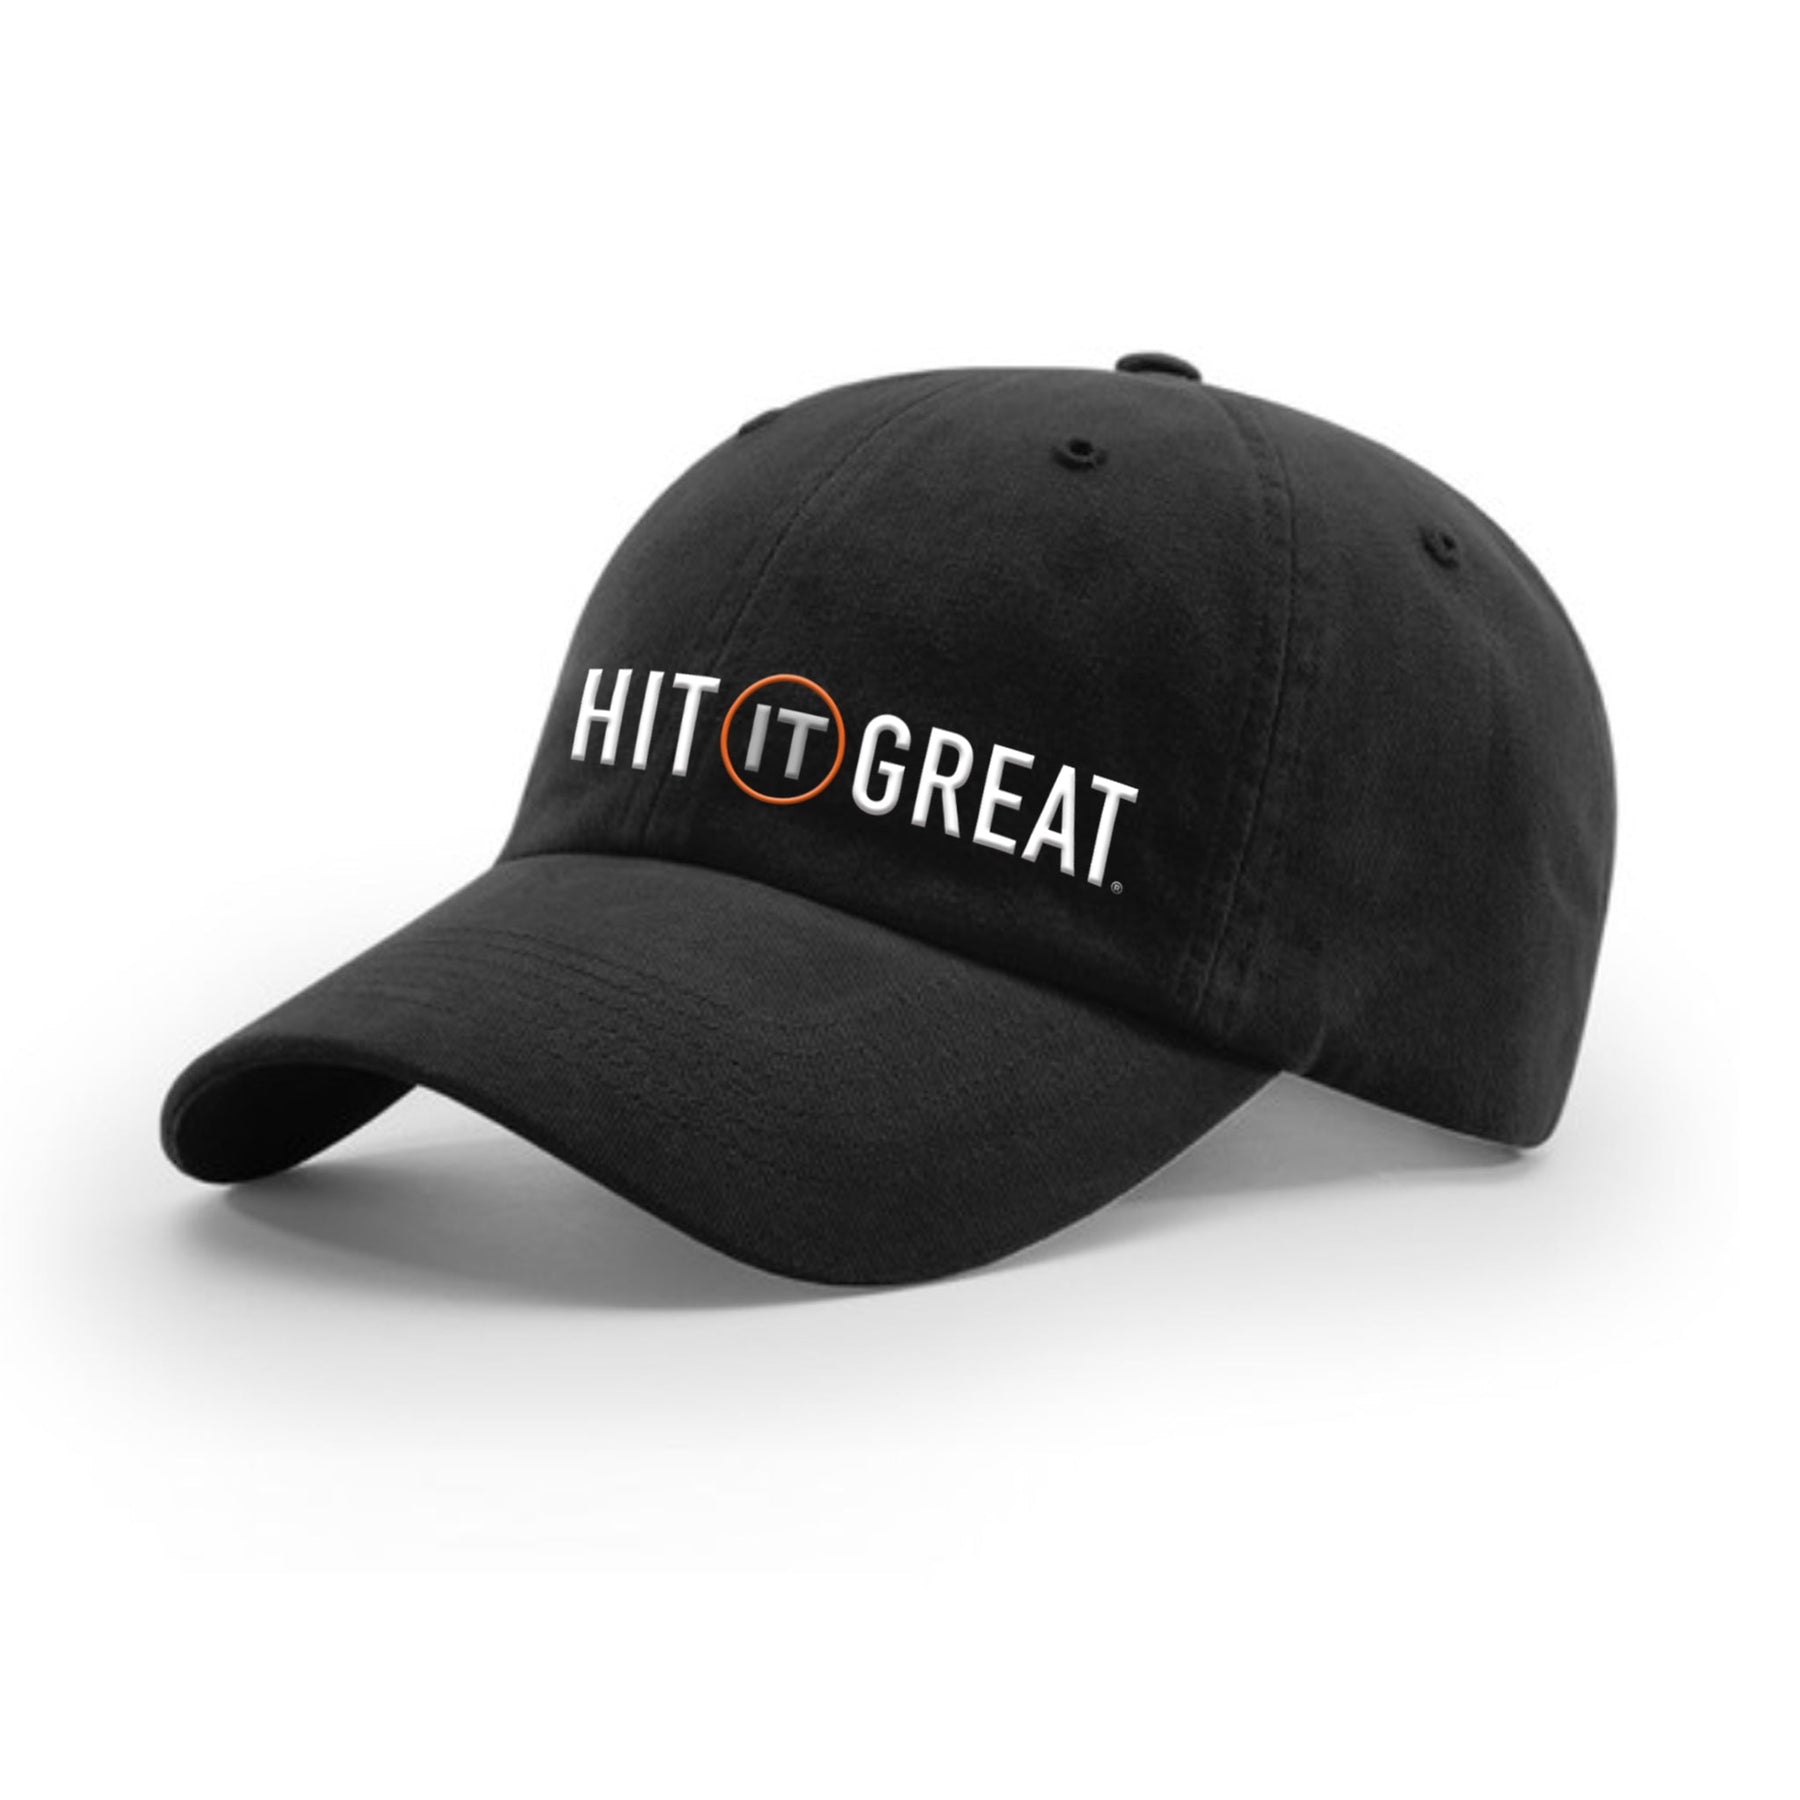 Unstructured Hat Black/White Embroidered Horizontal logo